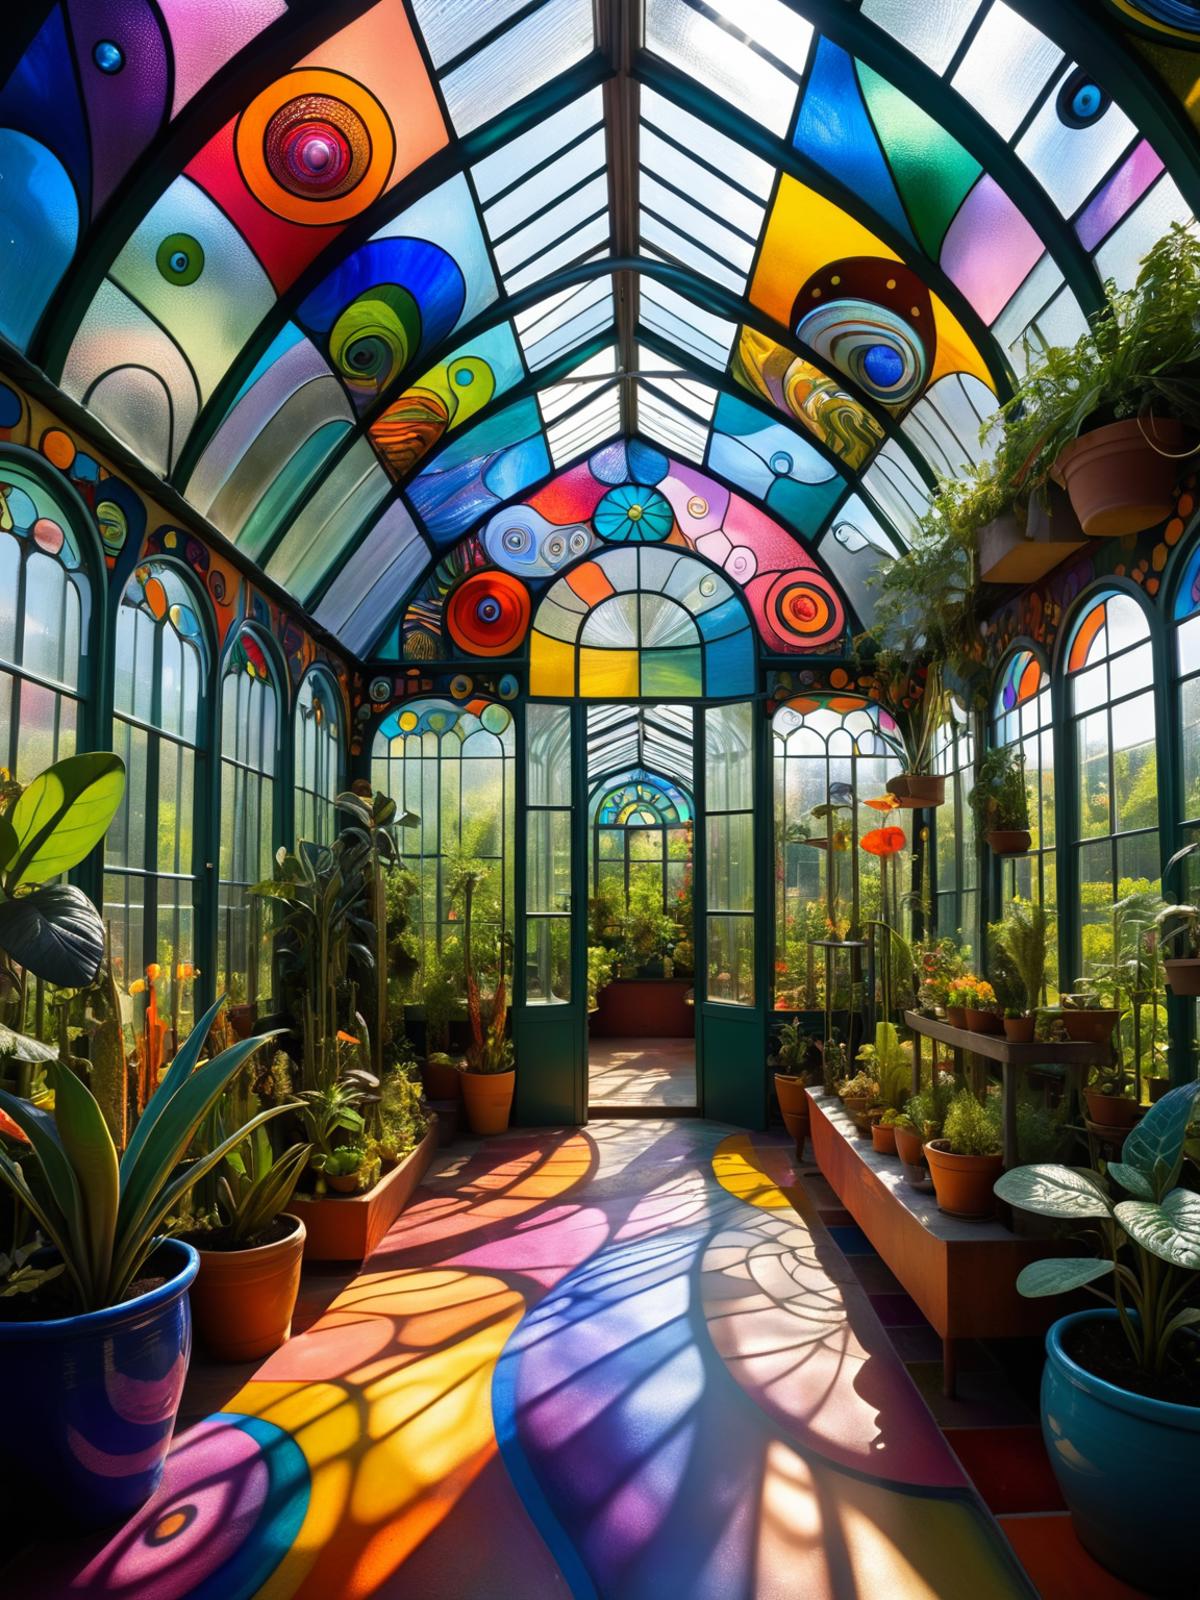 Colorful Stained Glass Windows and Stained Glass Ceiling in a Greenhouse with Plants